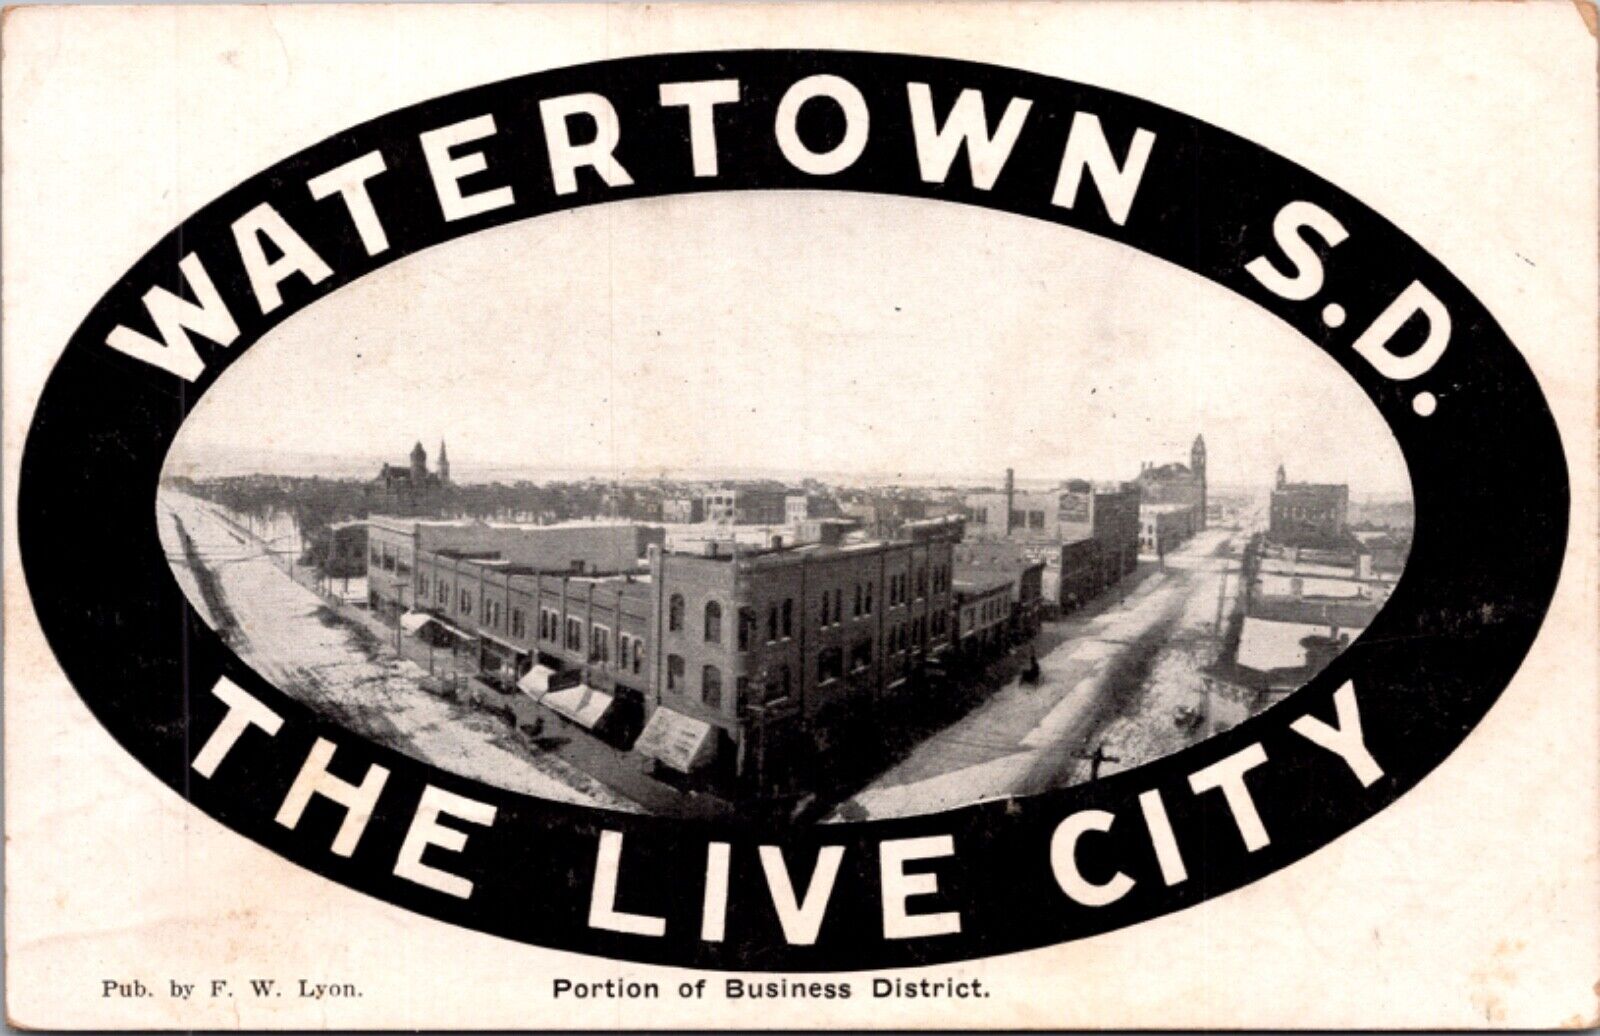 Postcard Portion of the Business District in Watertown, South Dakota